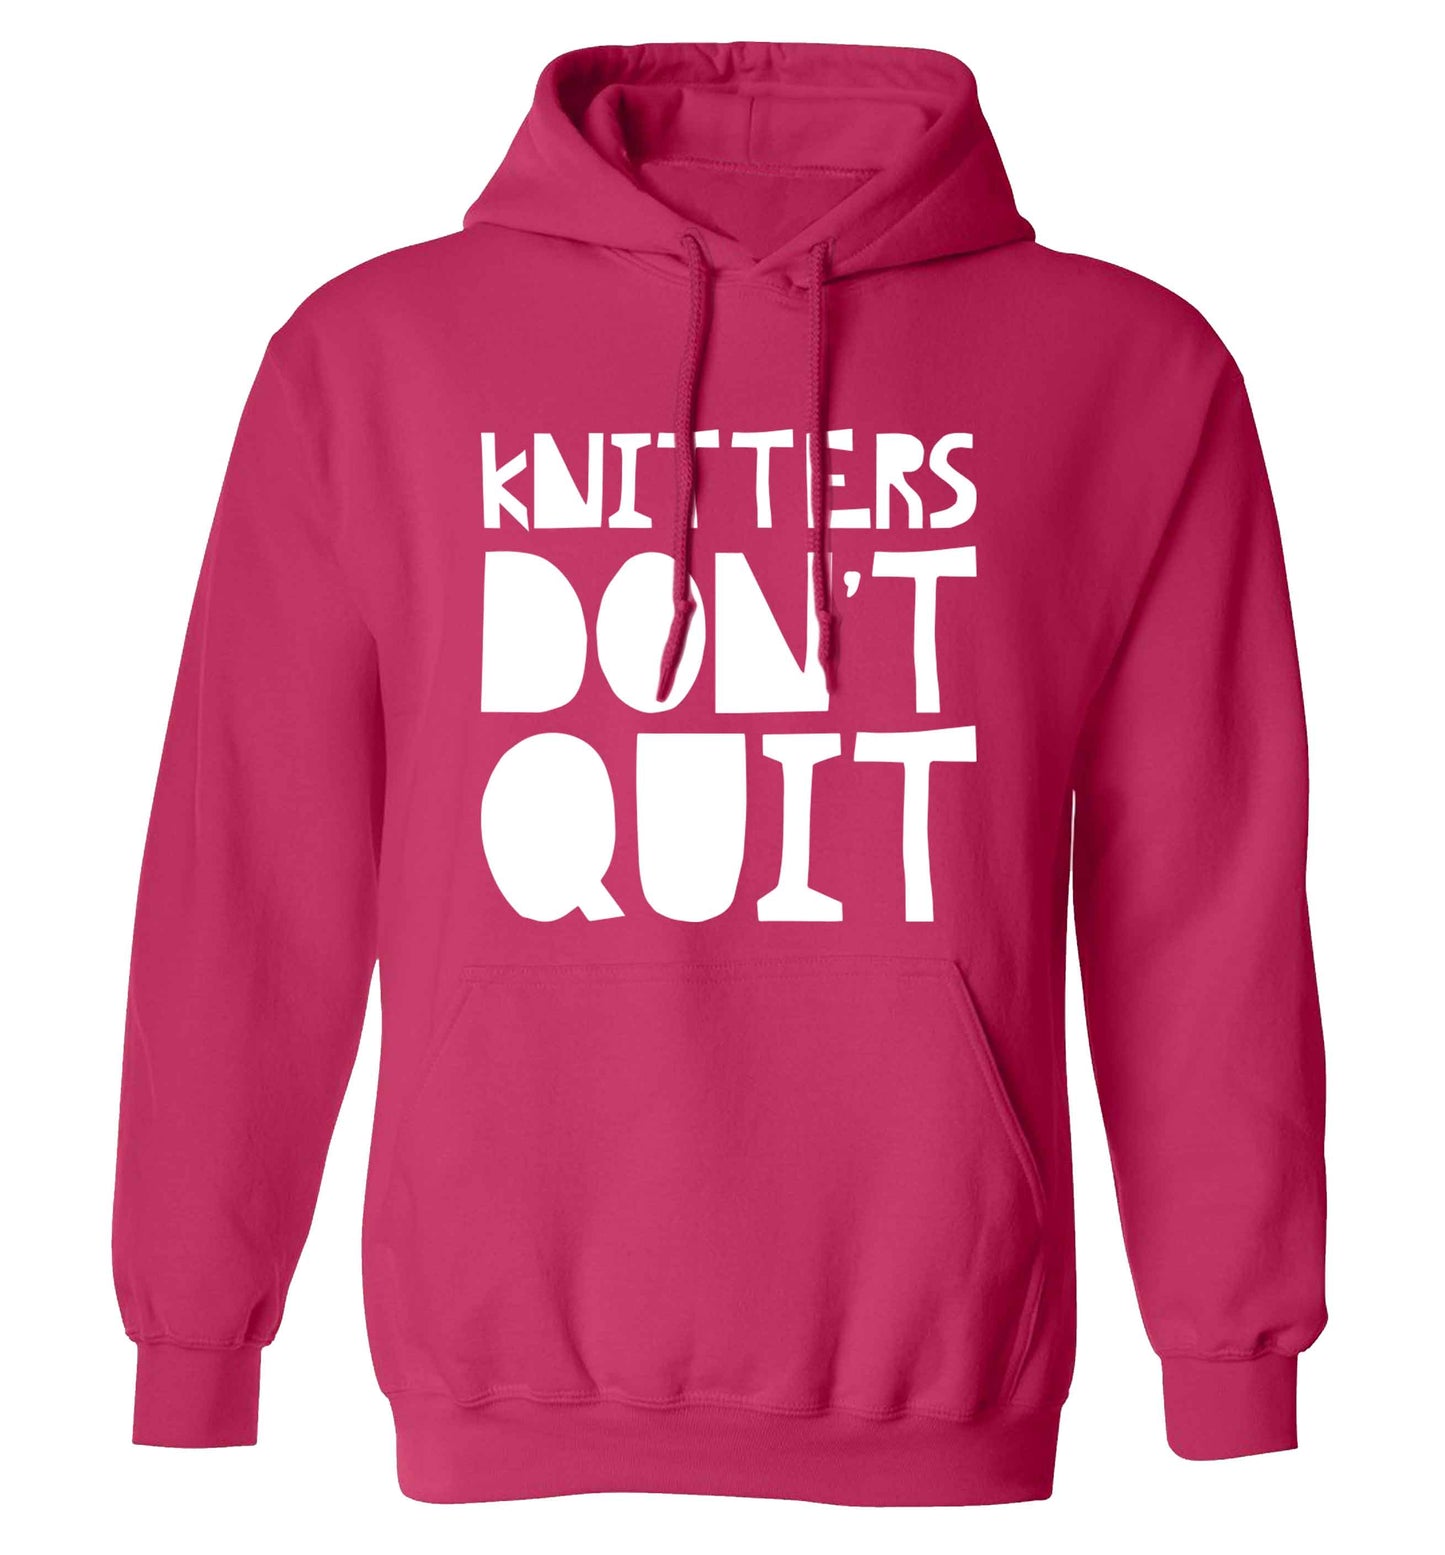 Knitters don't quit adults unisex pink hoodie 2XL